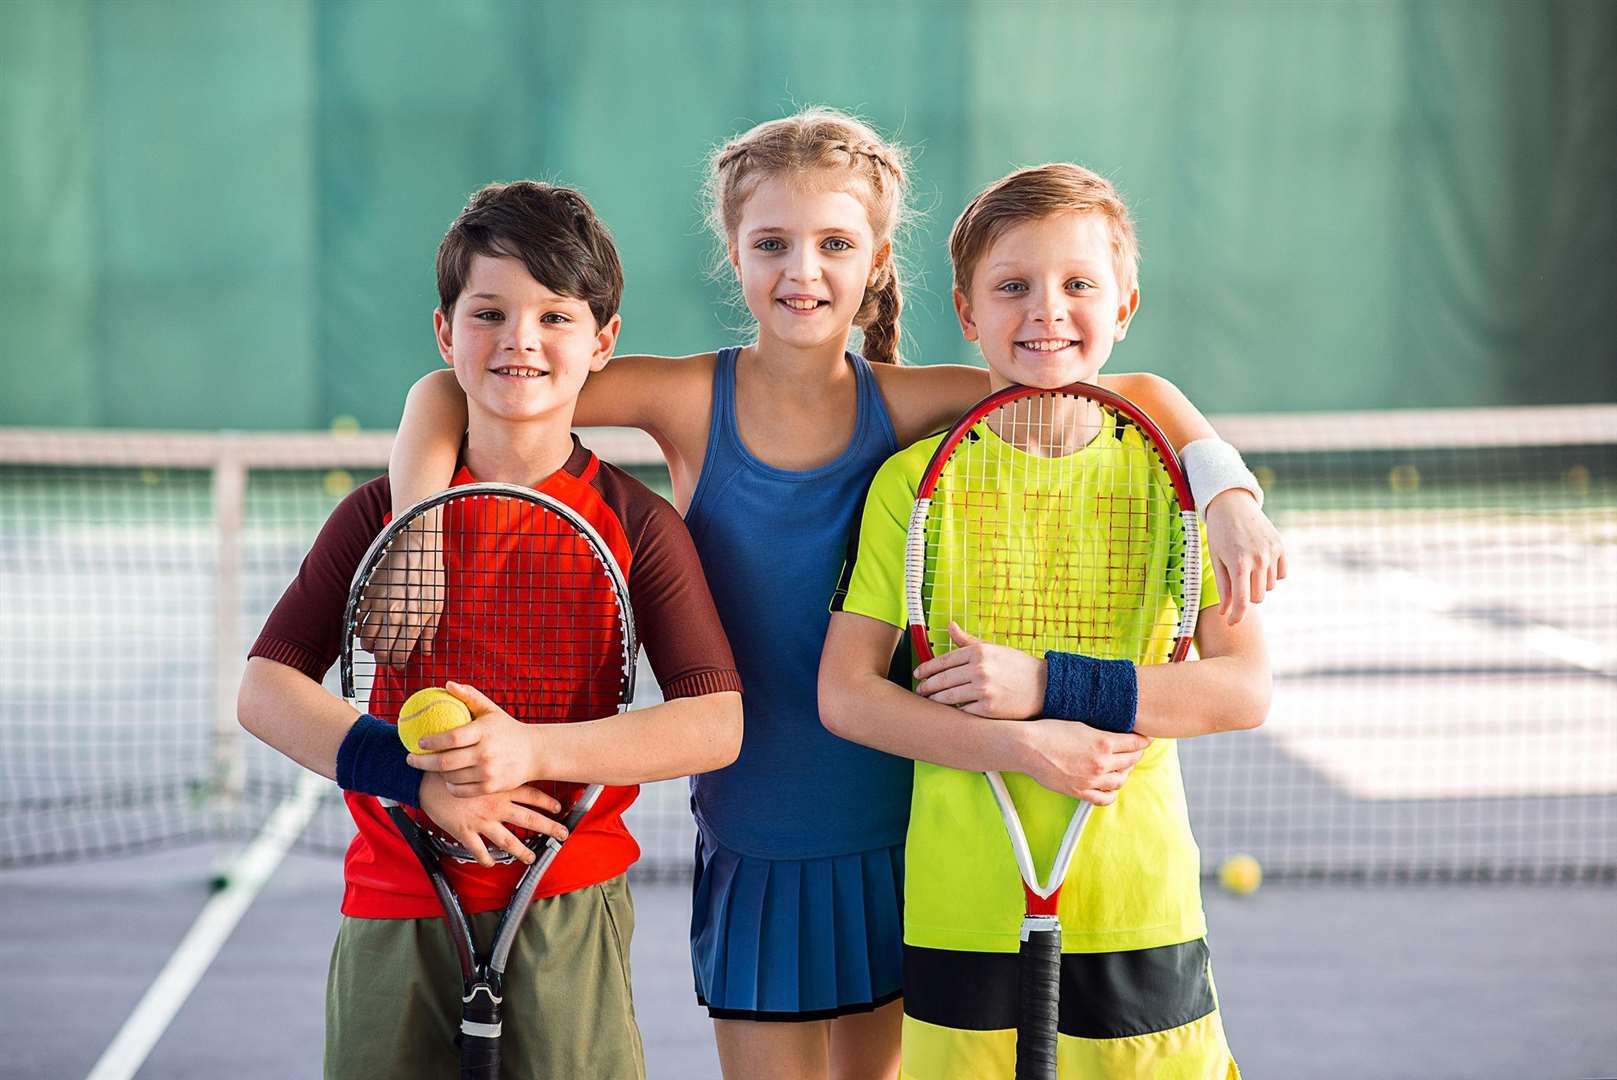 Tennis for Kids courses are designed for children who've never played and each session is fun, with some activities open to parents, too